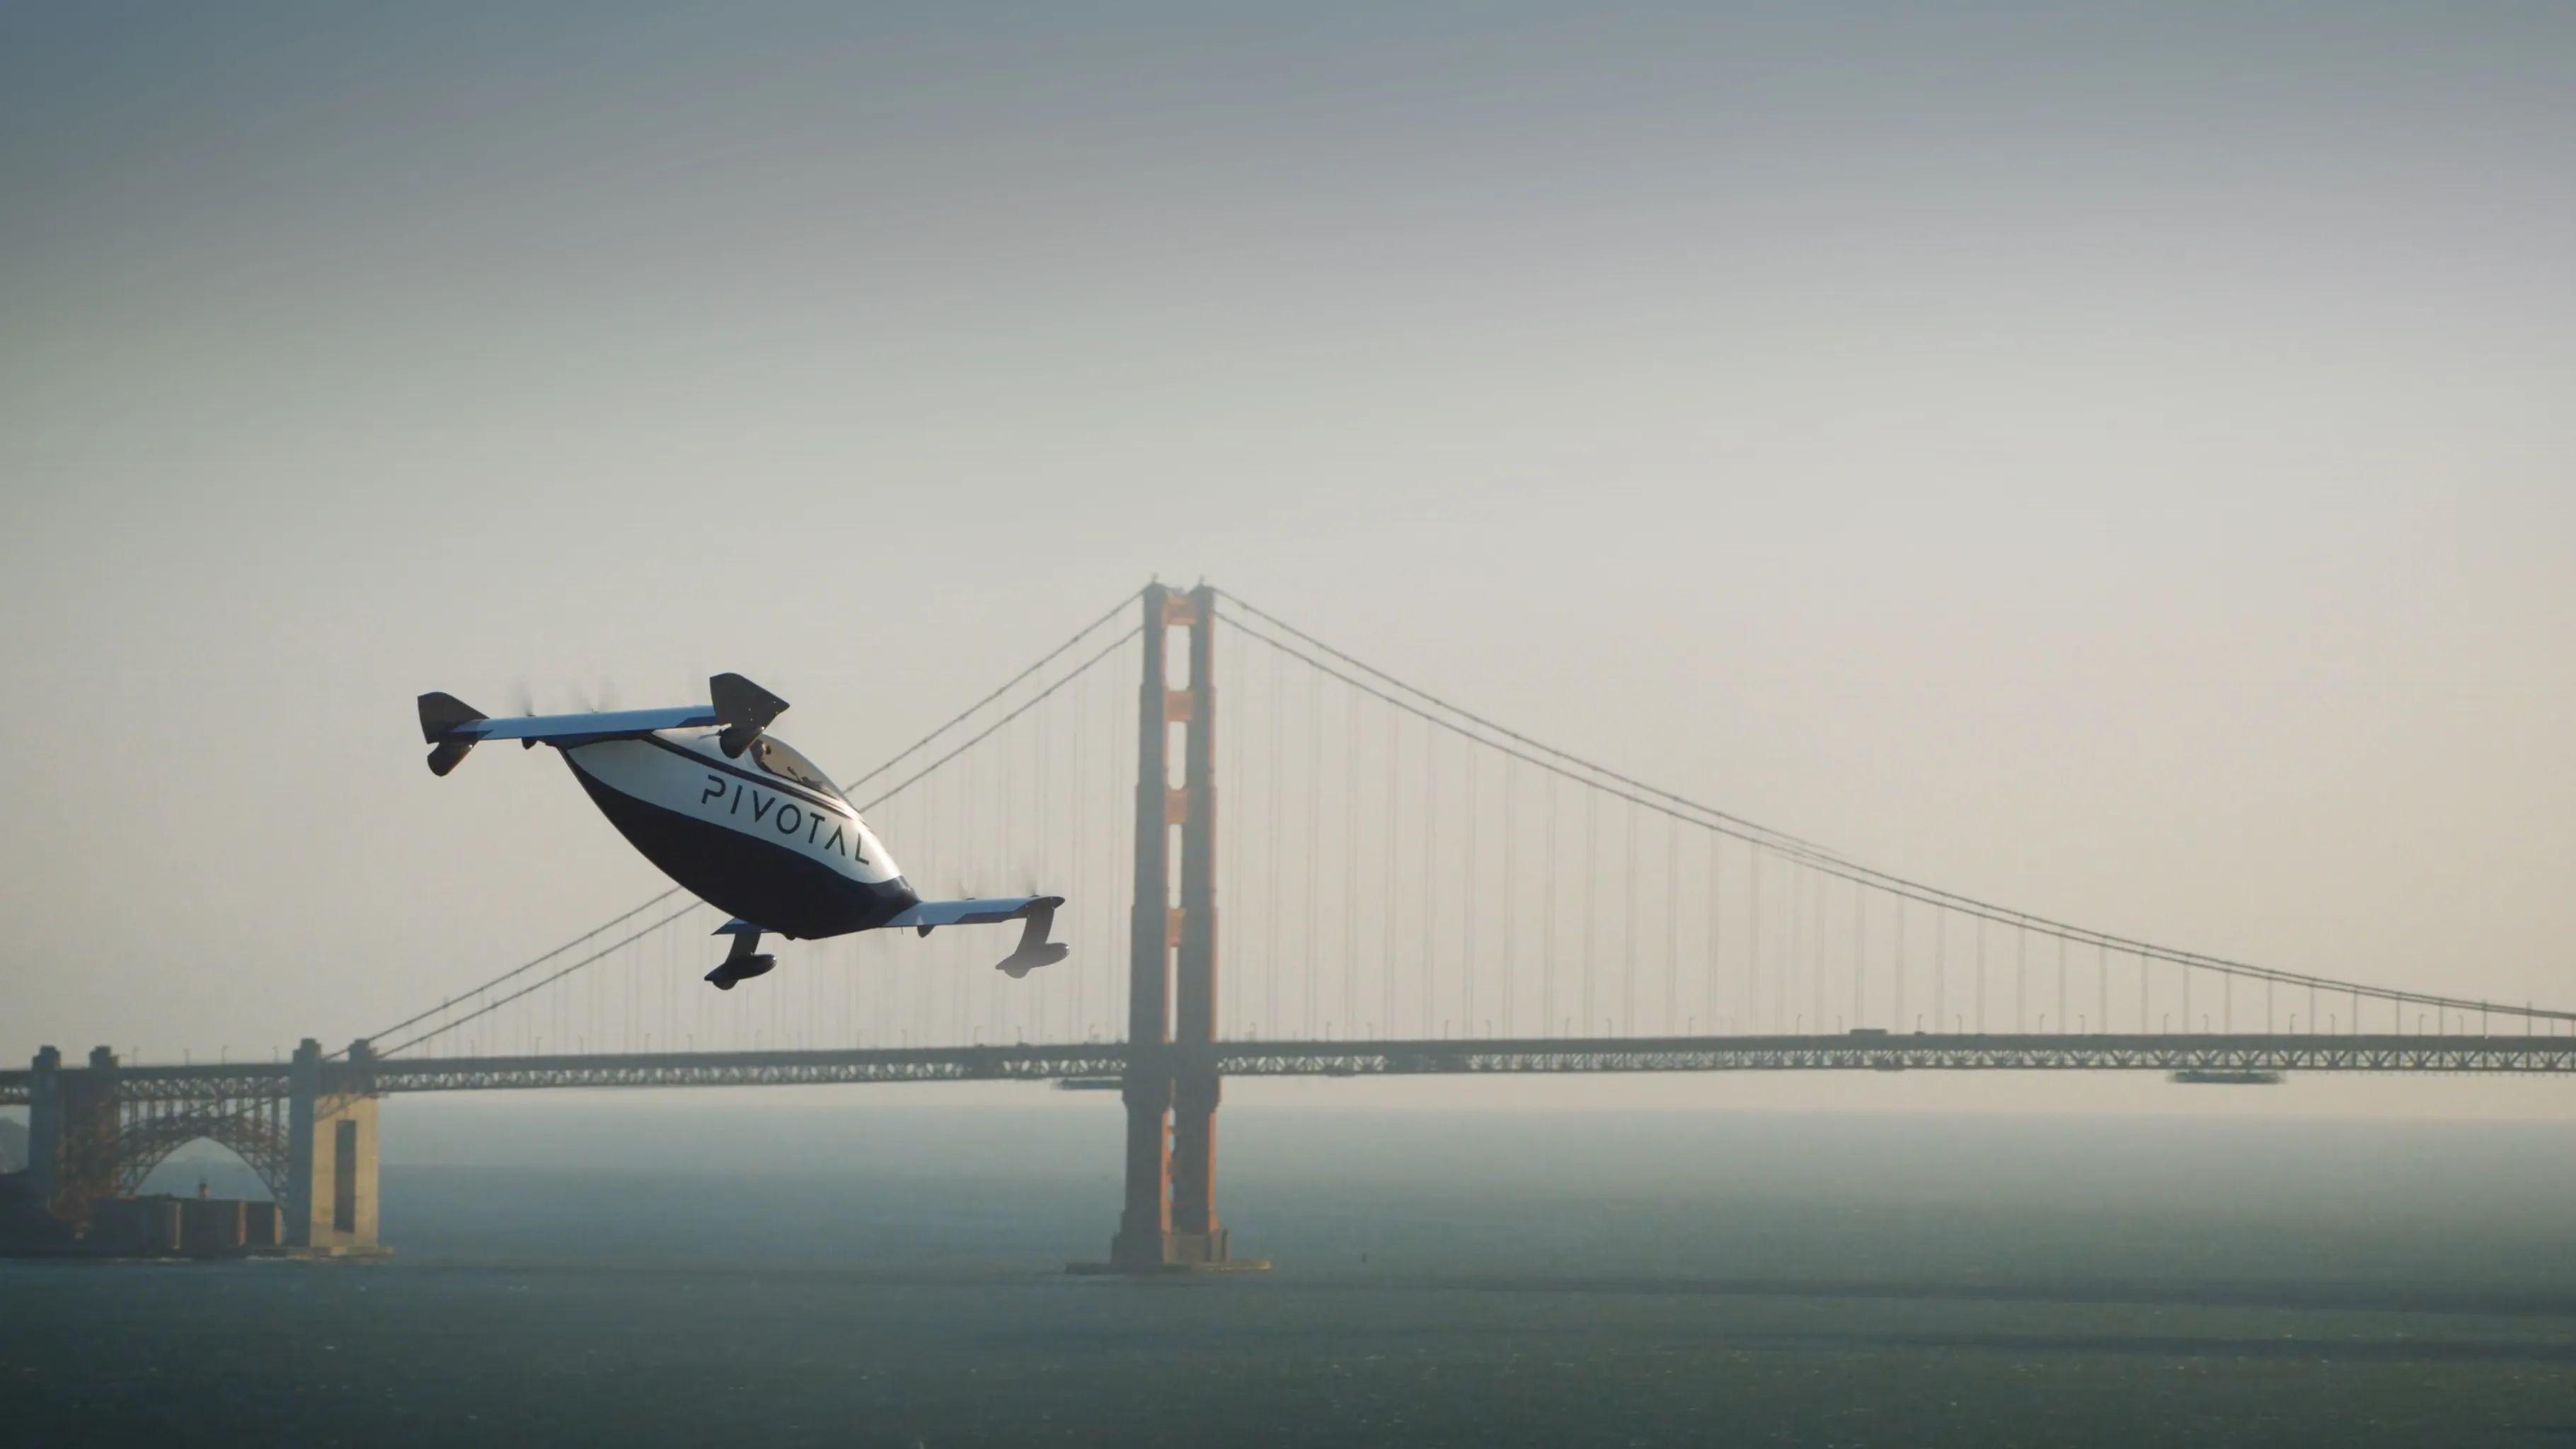 Pivotal Helix aircraft flying next to the Golden Gate Bridge in San Francisco, California.